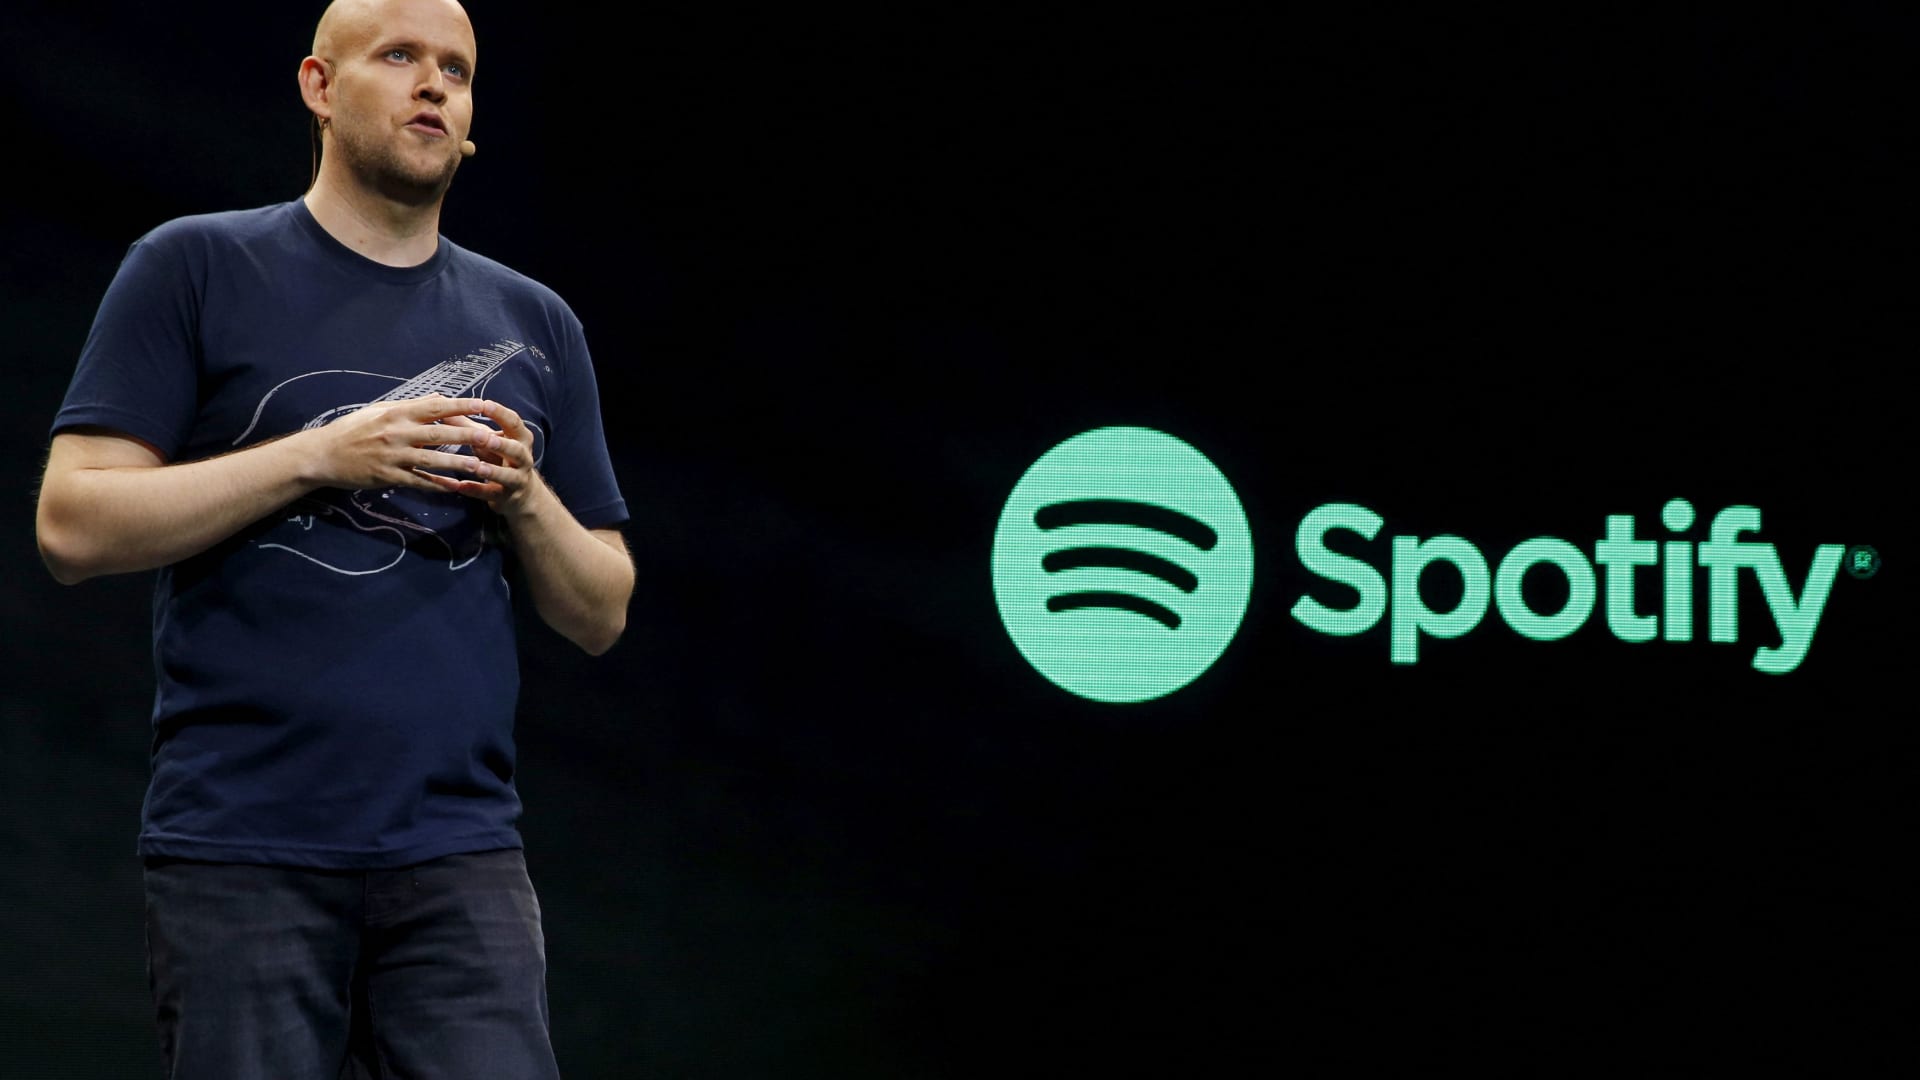 Tech stocks to buy like Apple and Spotify - CNBC